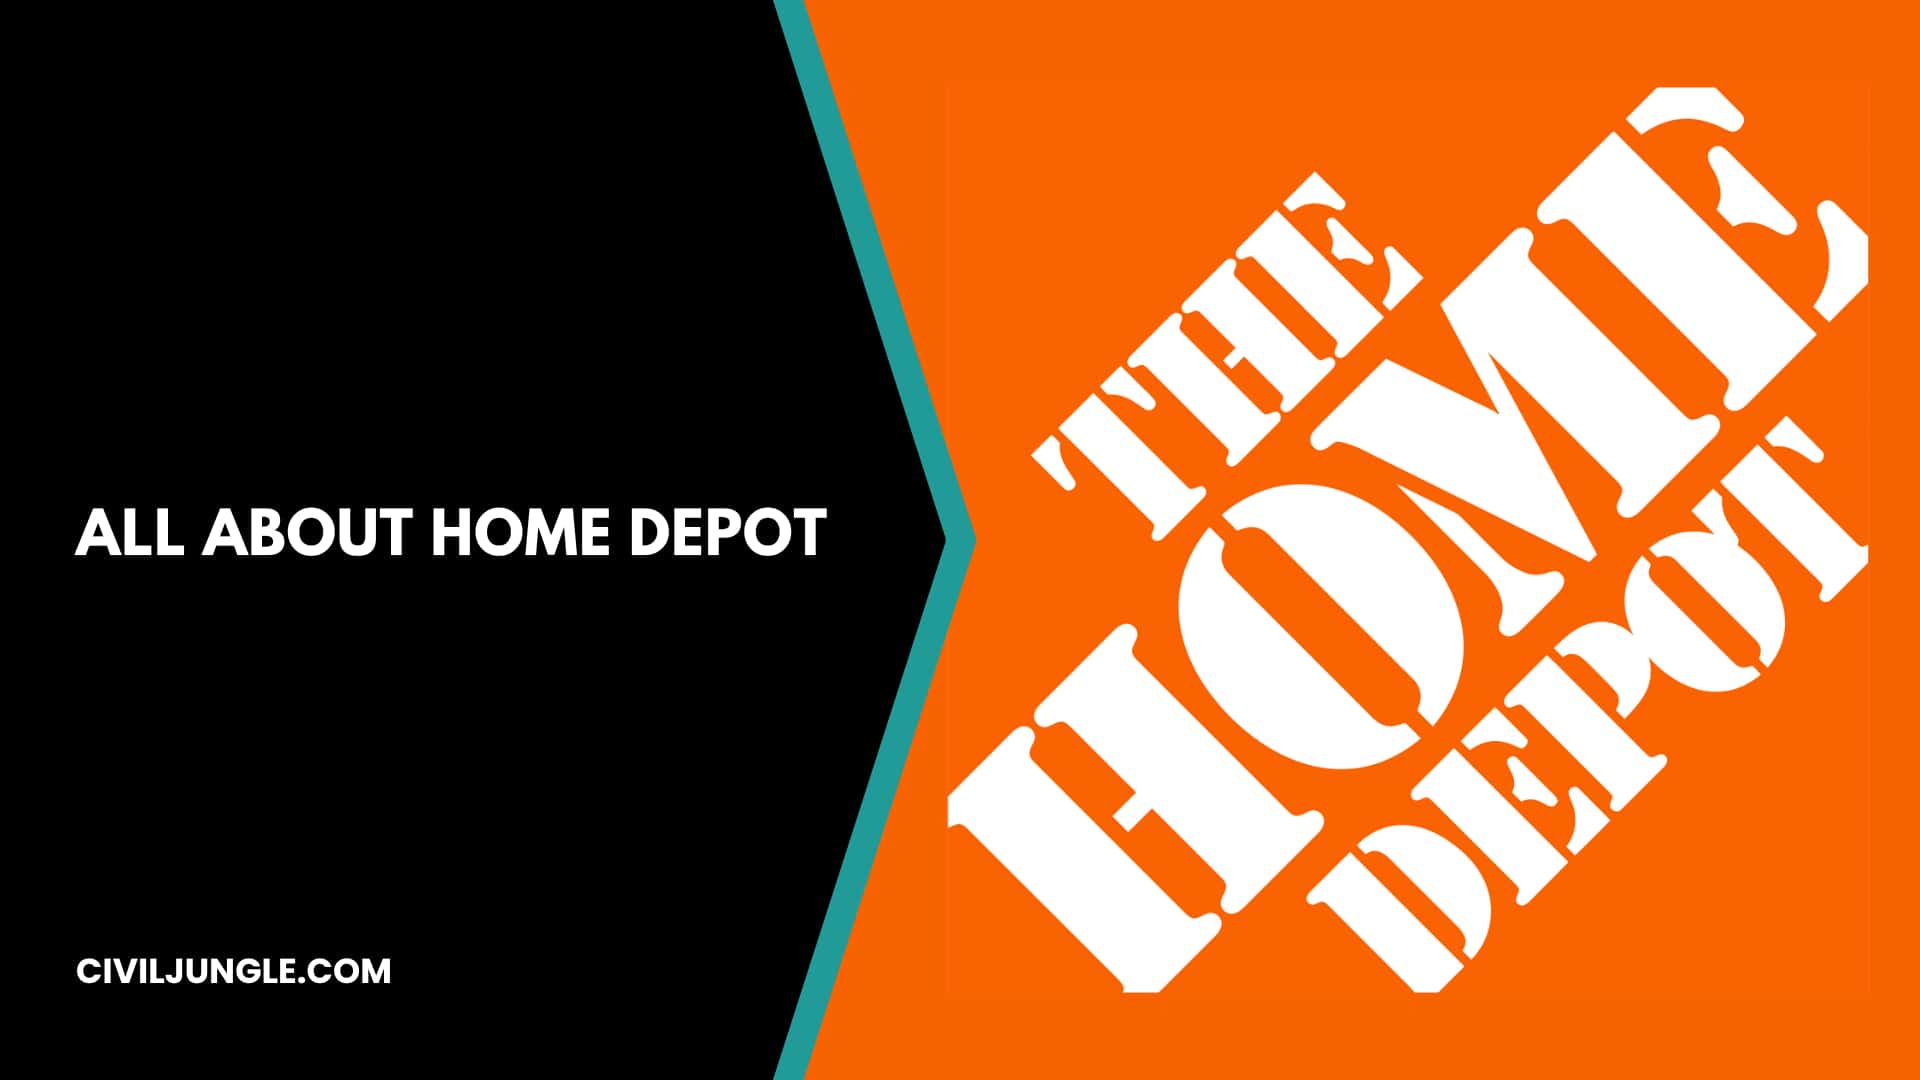 All About Home Depot